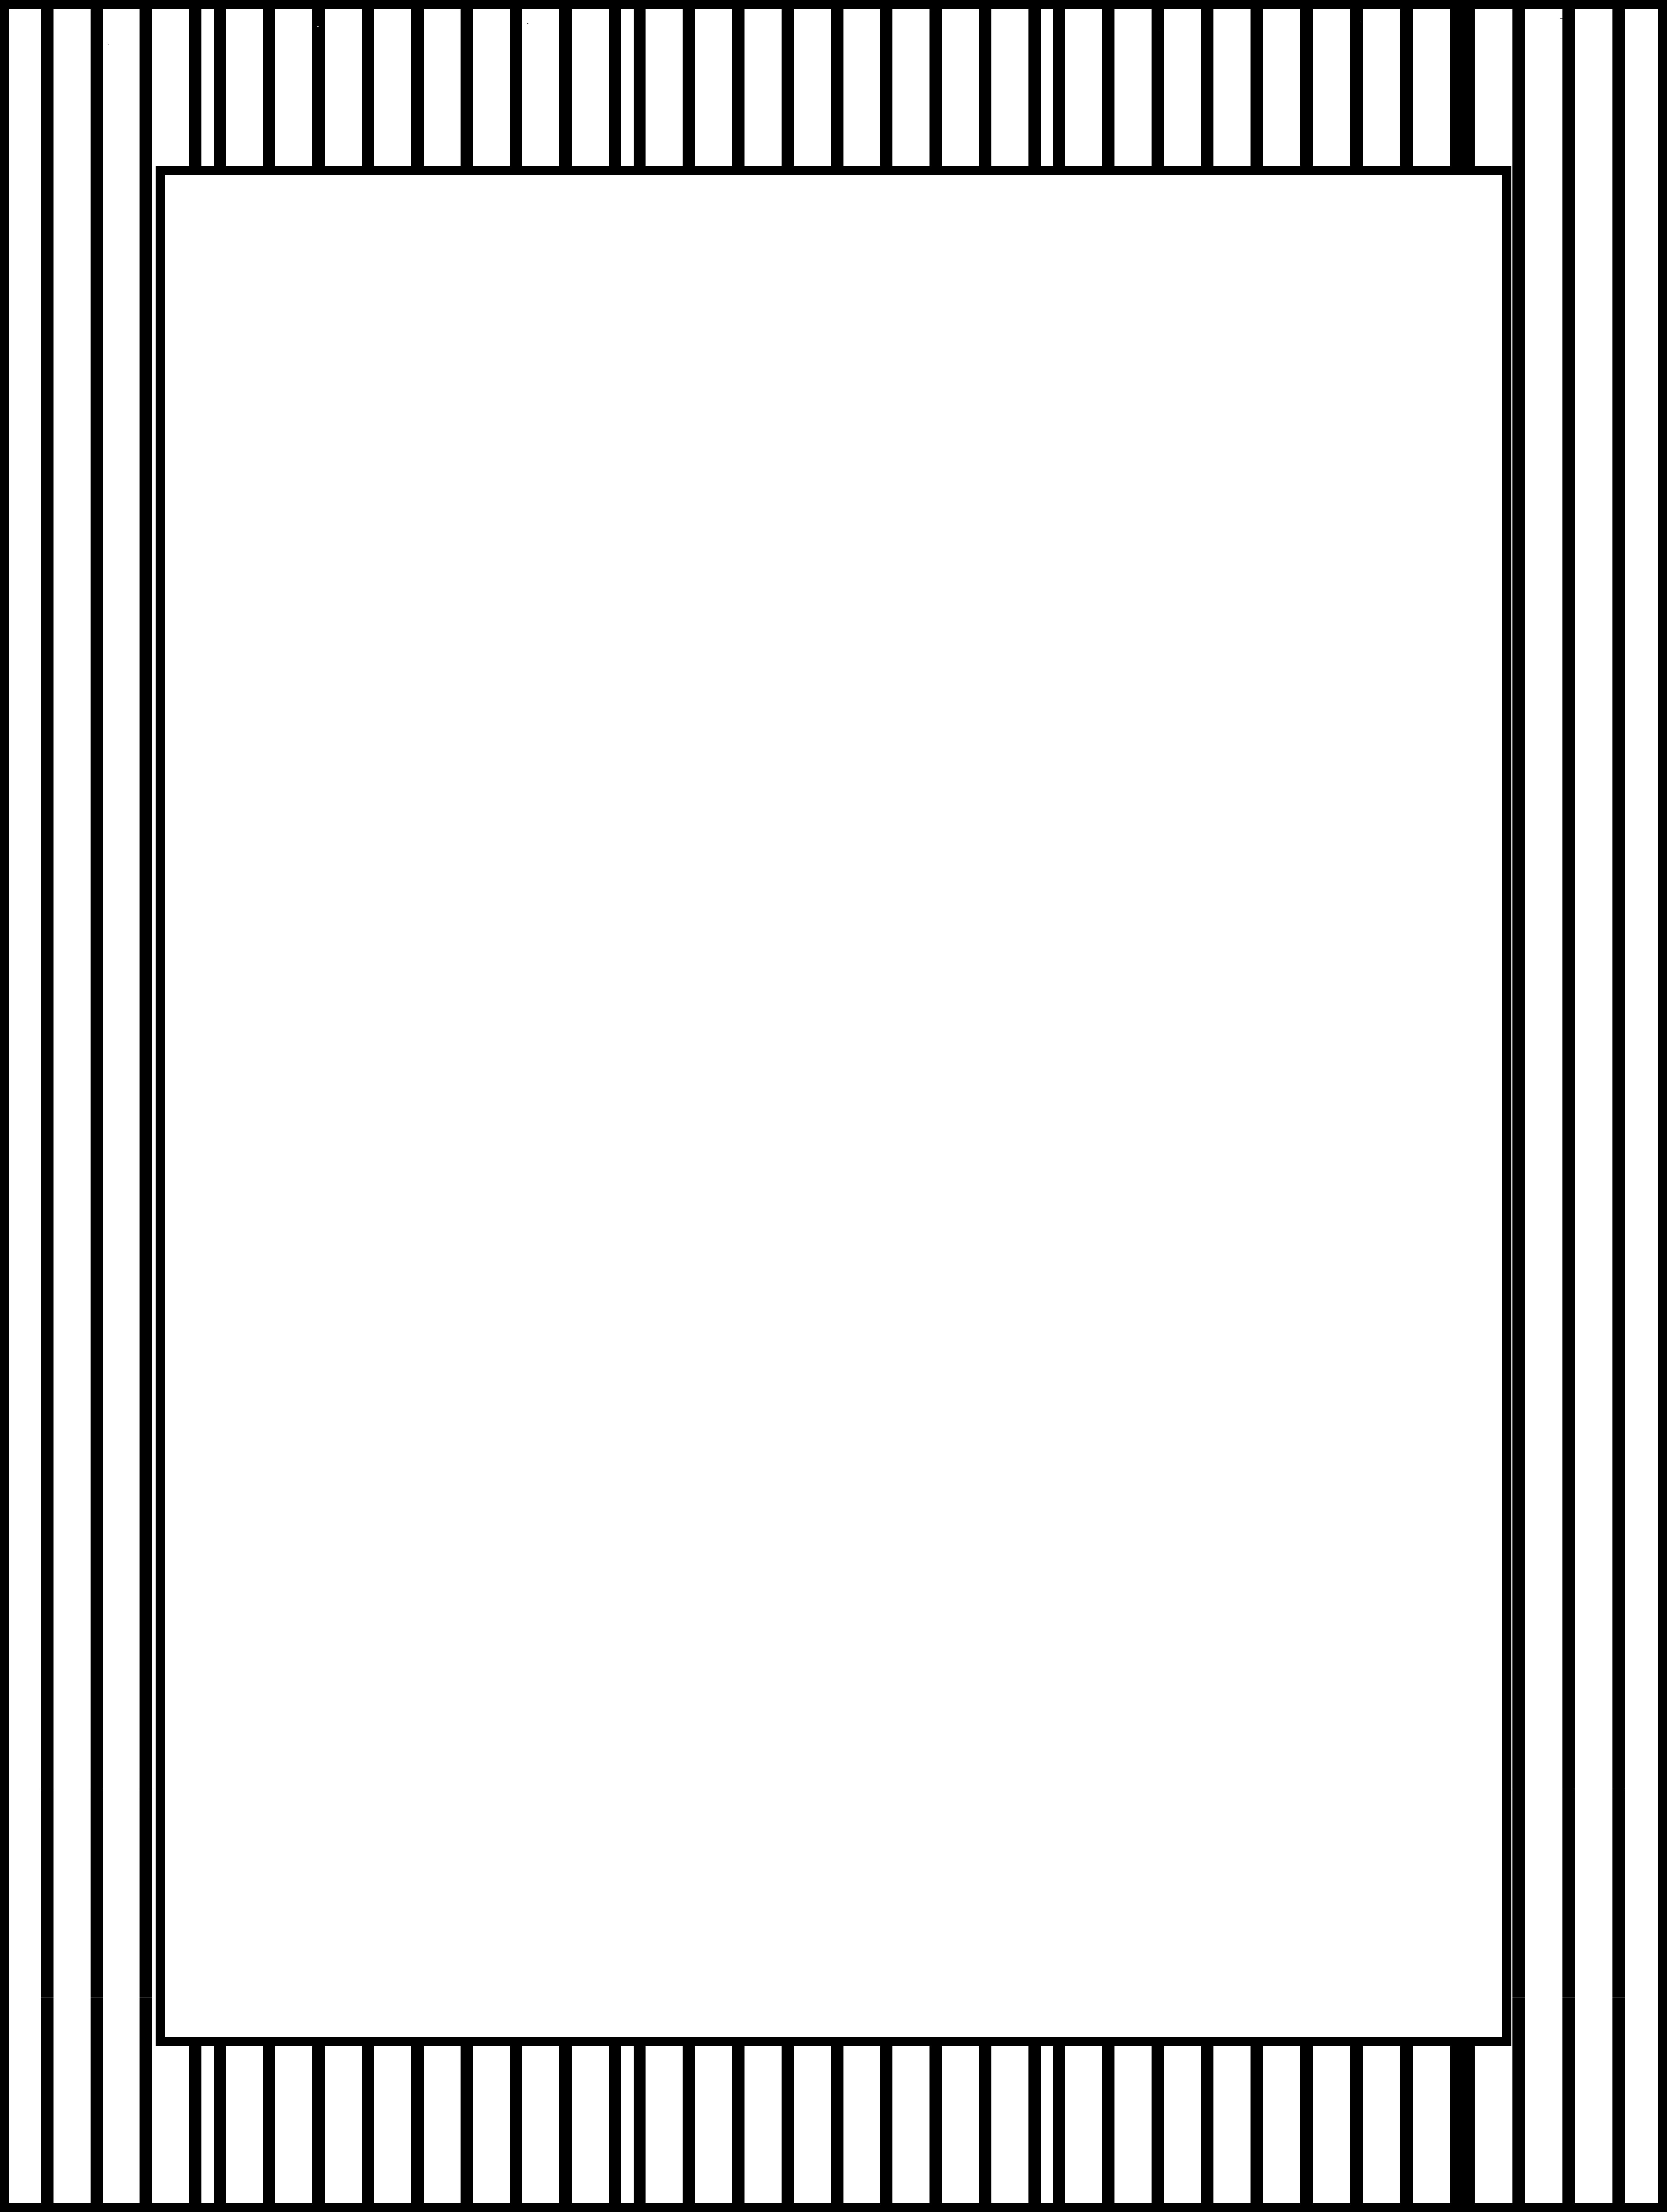 Ten Versatile Black and White Borders for Any DTP Project